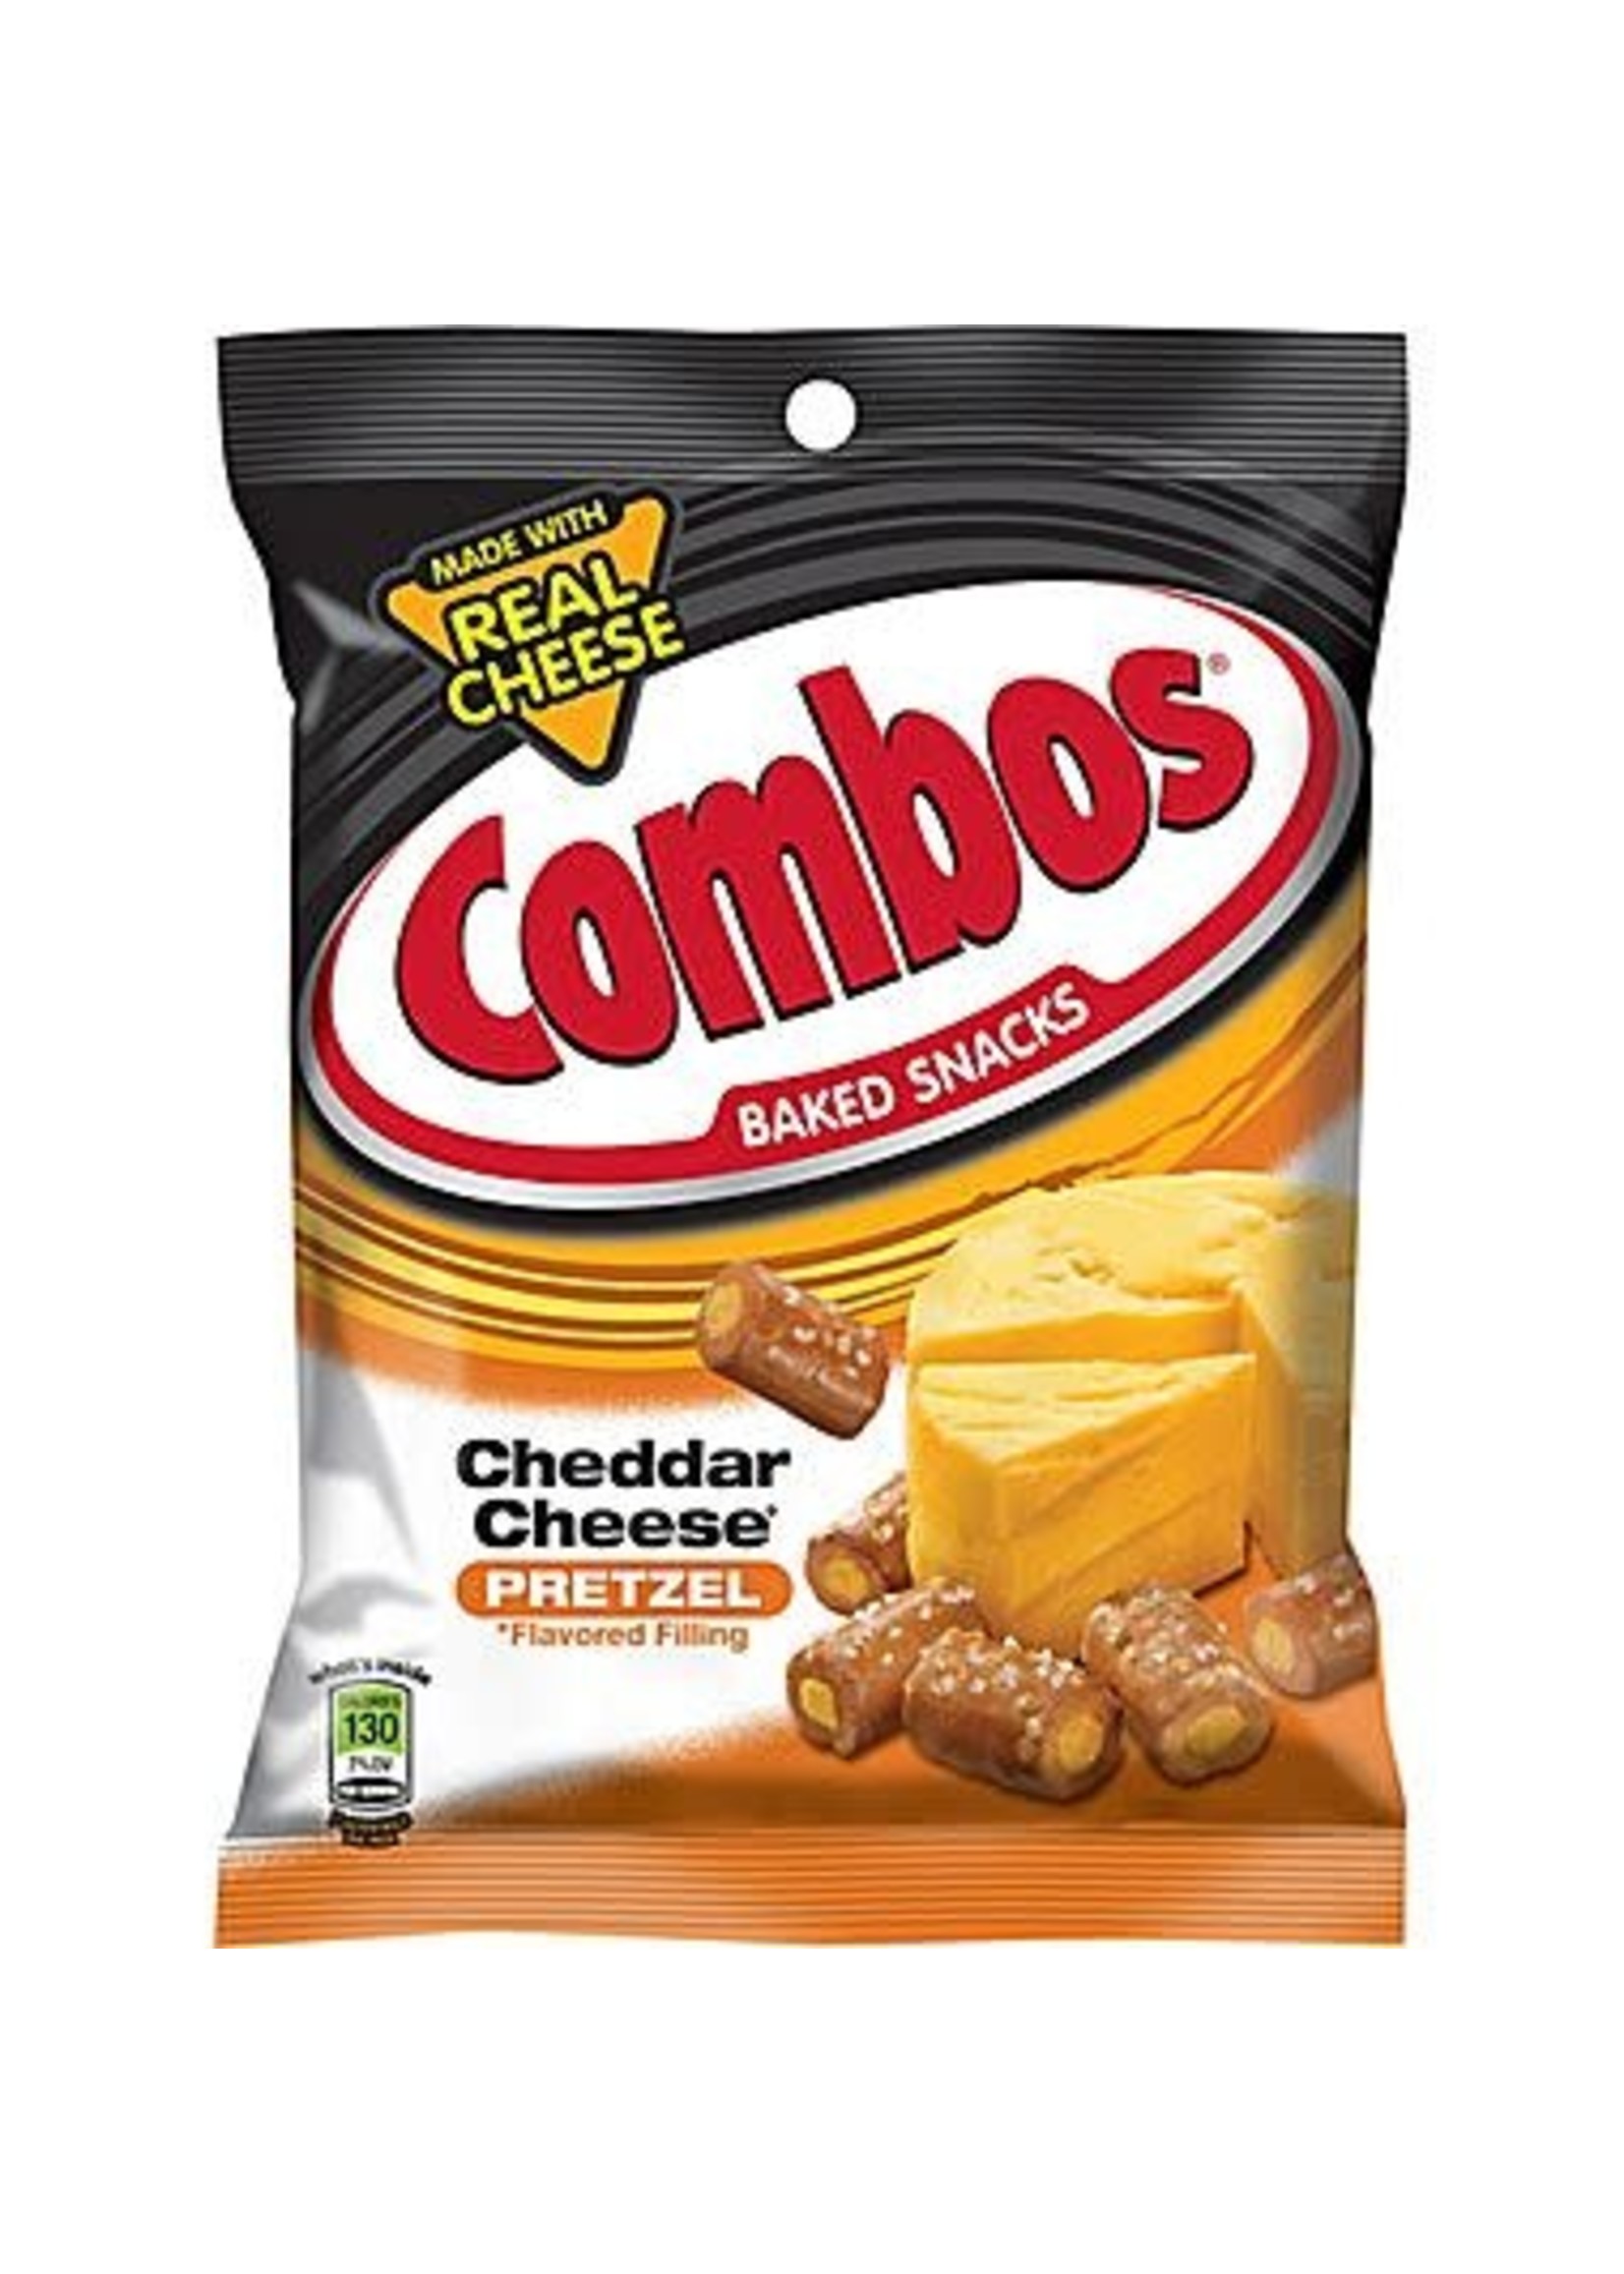 Combos - Cheddar Cheese / Baked Pretzel - 178 g